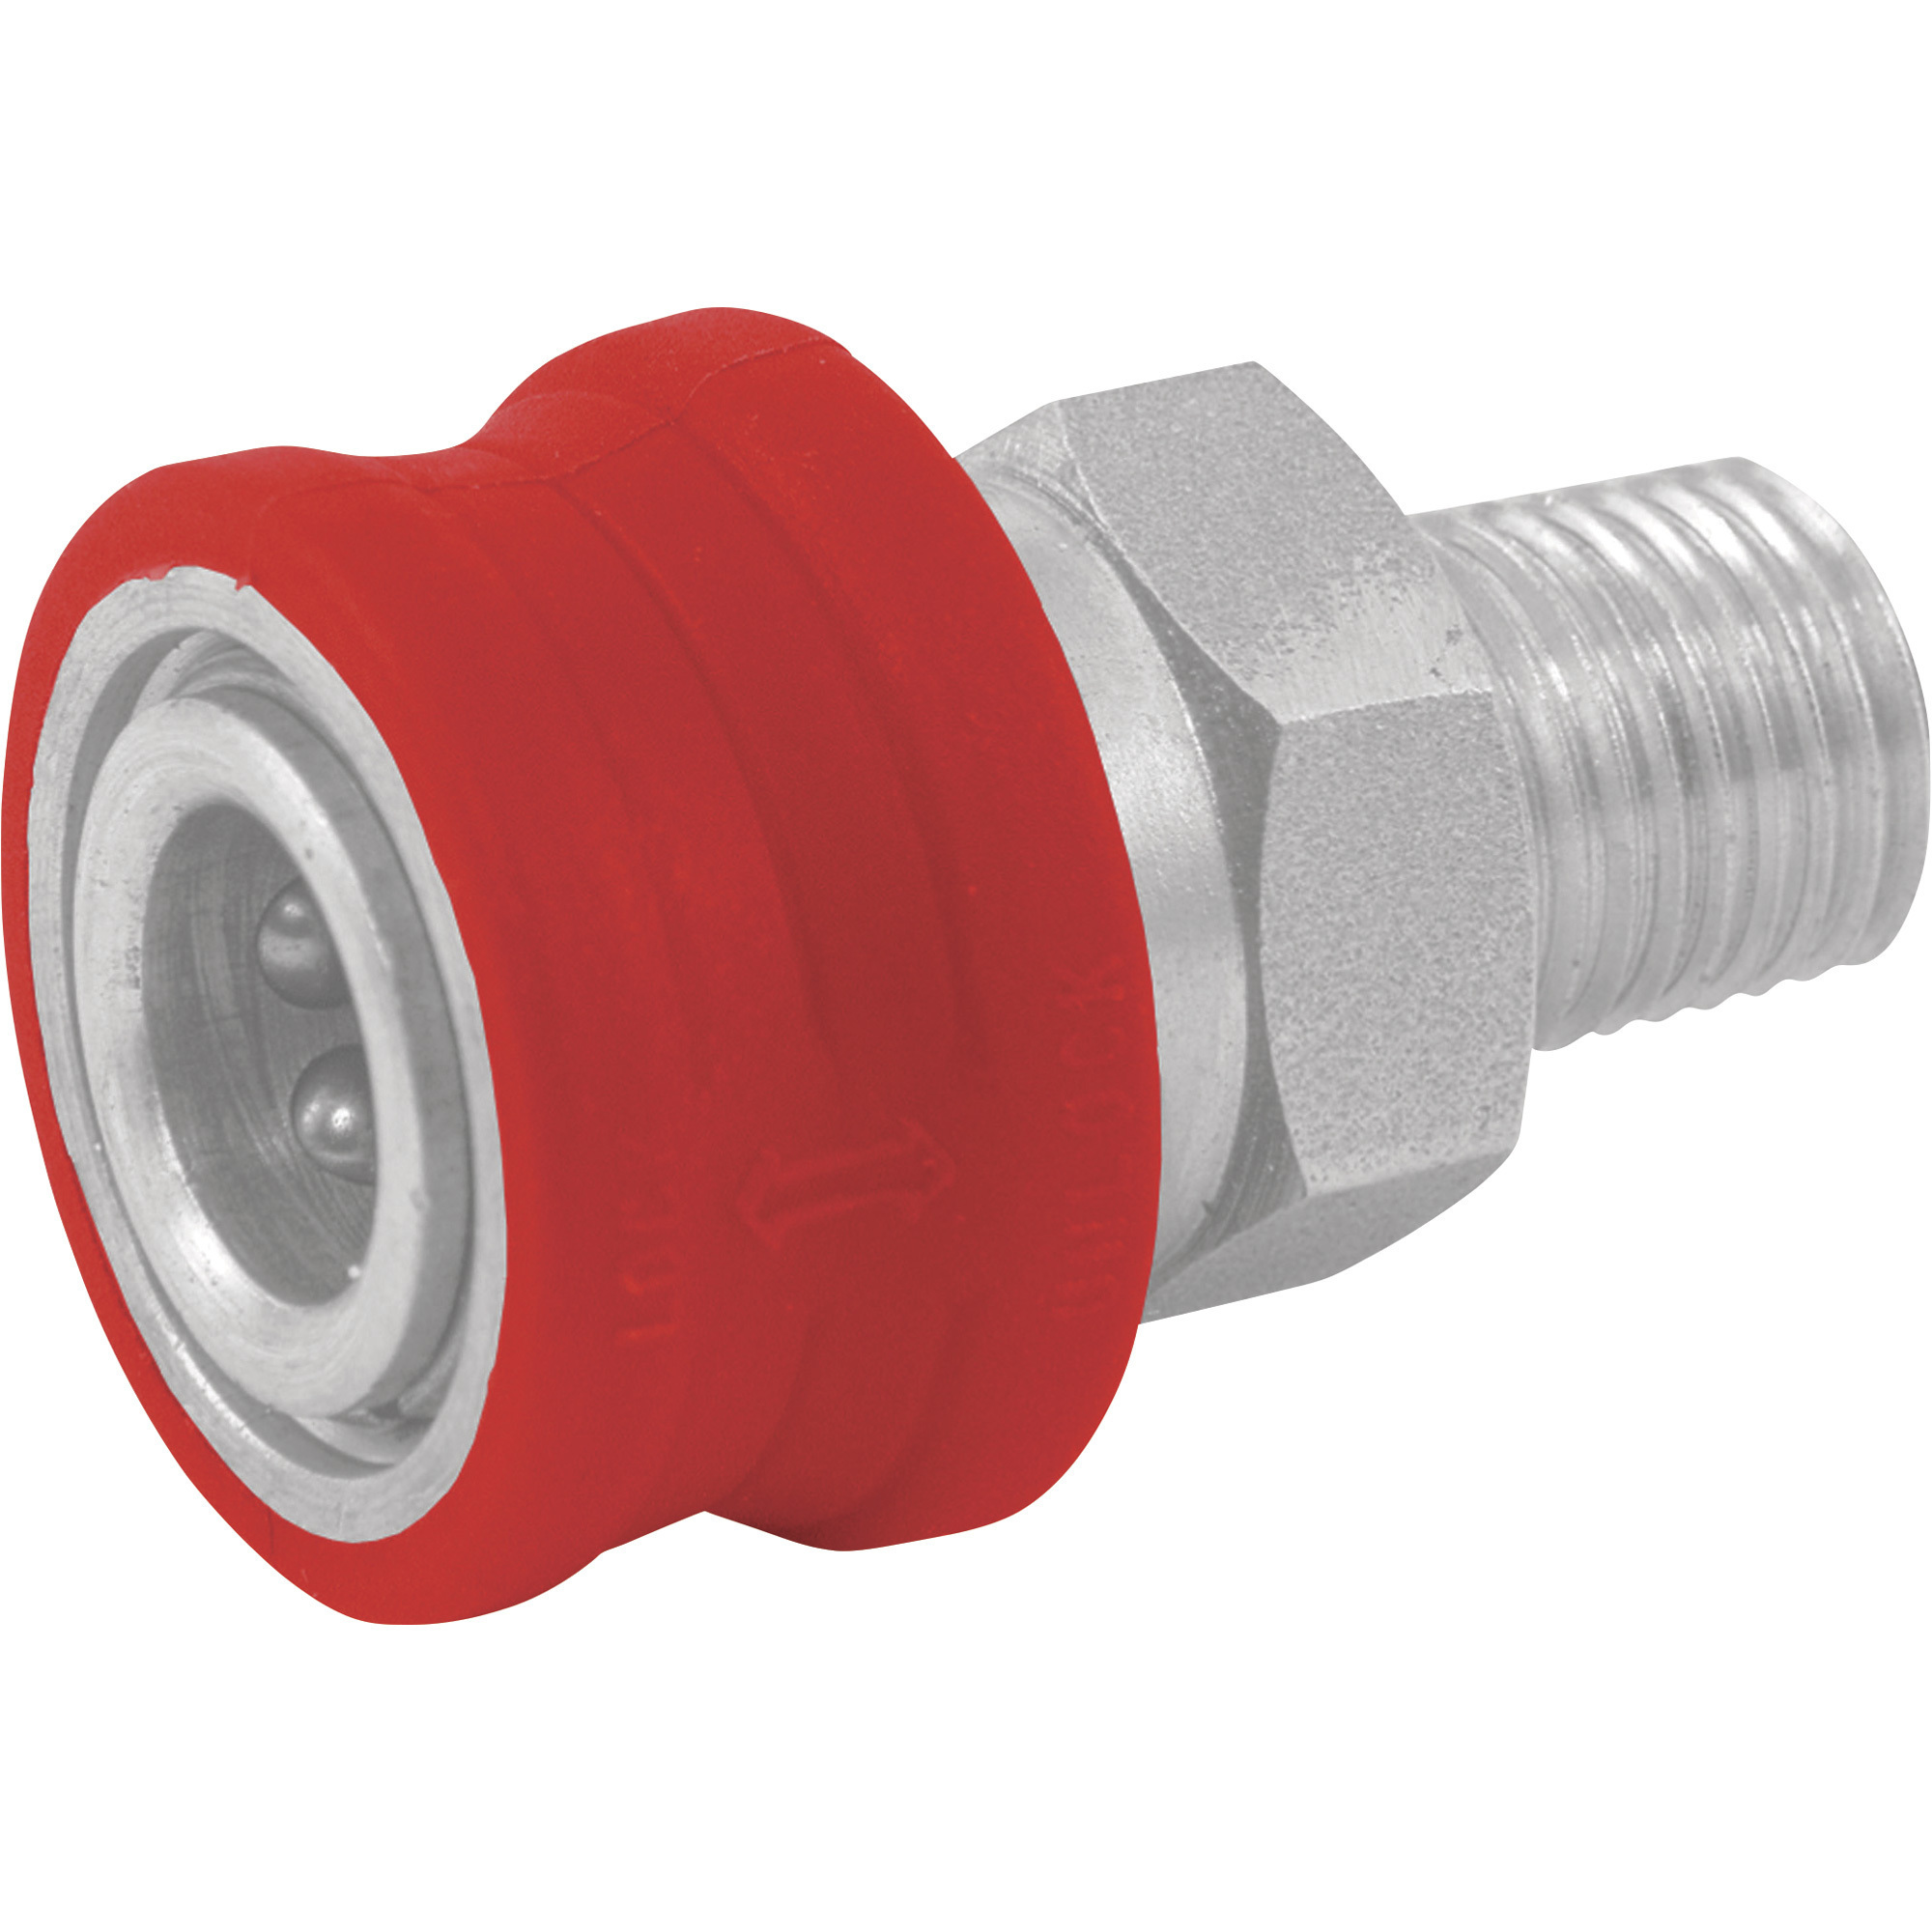 NorthStar Pressure Washer Insulated Quick-Connect Coupler â 1/4Inch NPT-M, 5000 PSI, 12.0 GPM, Stainless Steel, Model 2100386P